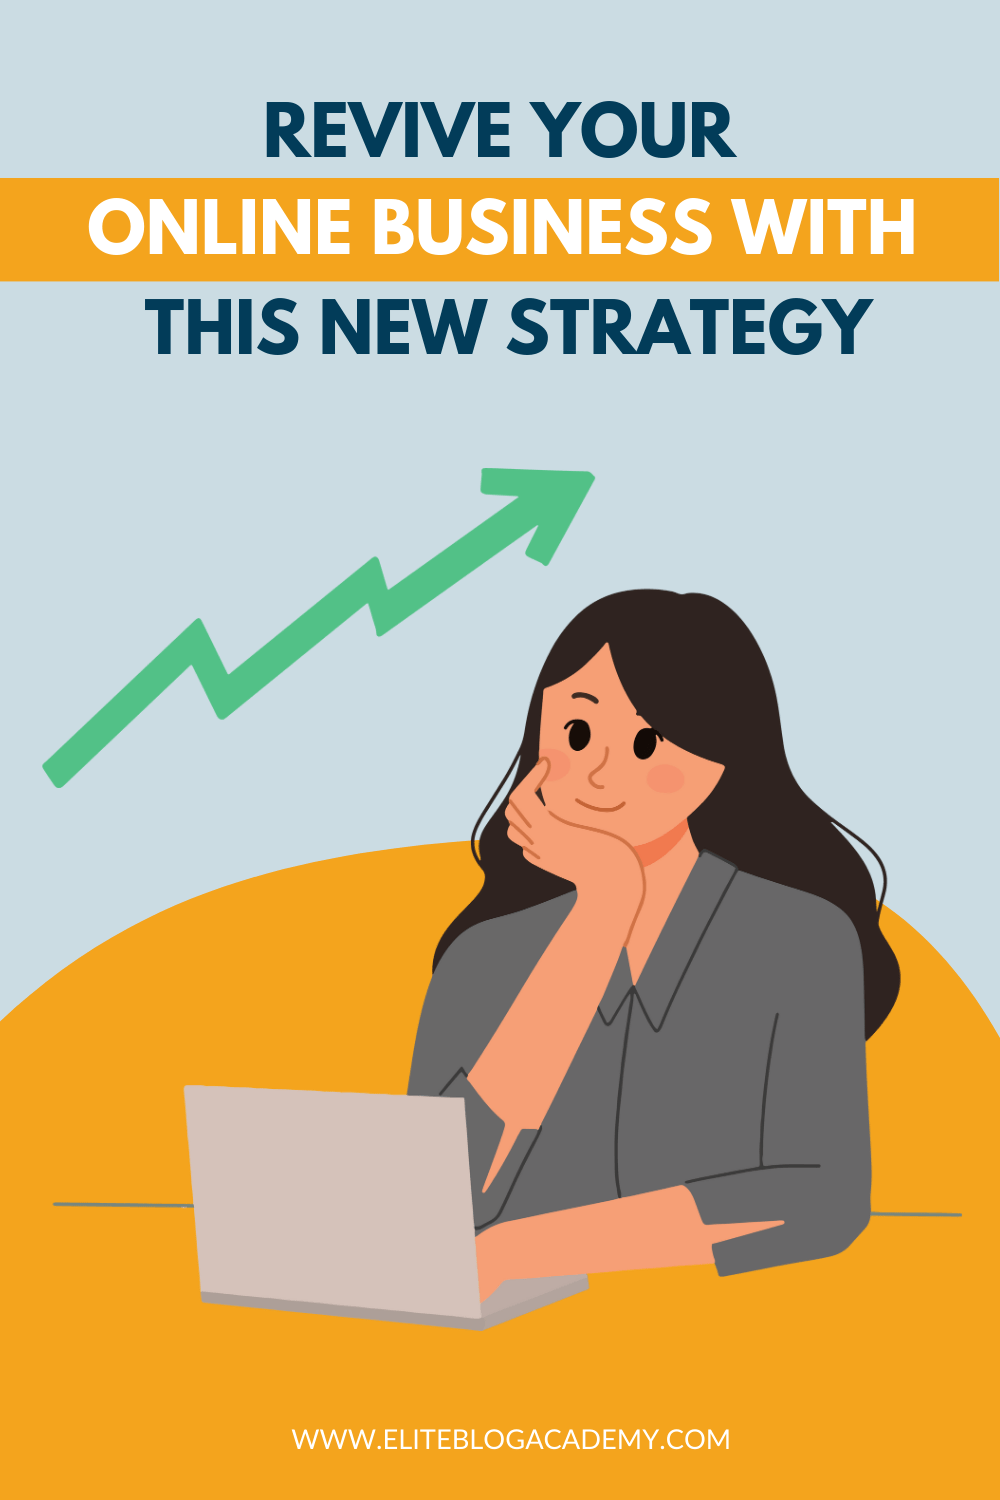 Revive Your Online Business with this New Strategy